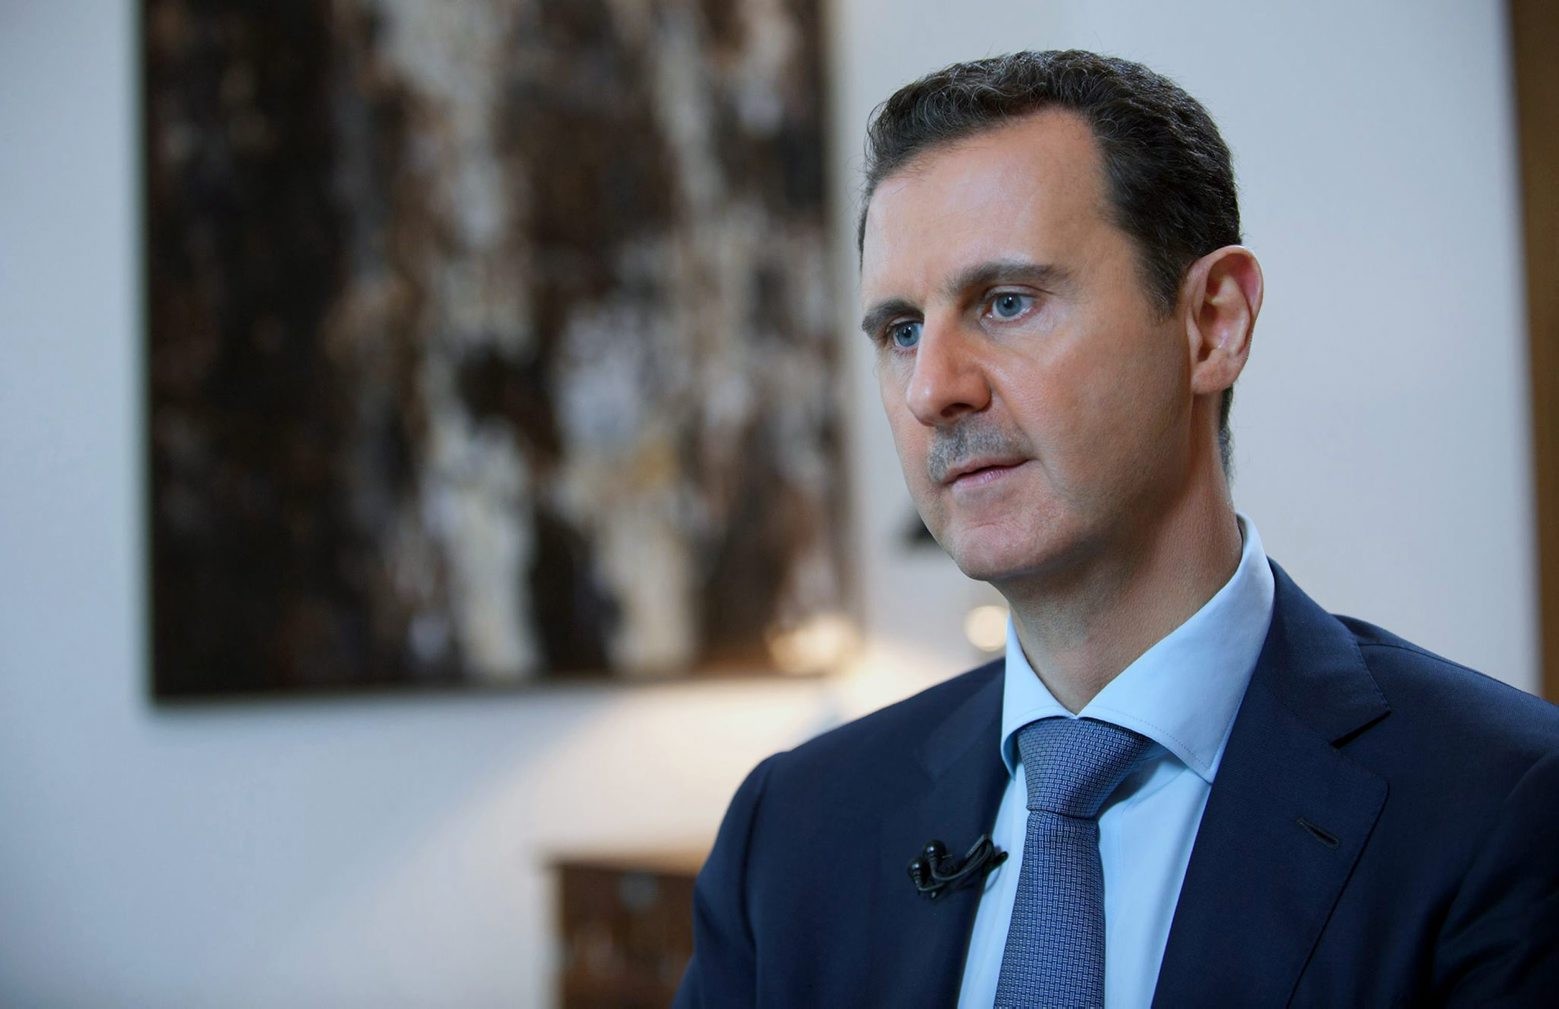 In this photo released by the Syrian official news agency SANA, shows Syrian President Bashar Assad, speaking during an interview with the Iran's Khabar TV, in Damascus, Syria, Sunday, Oct. 4, 2015. Assad said in the interview aired Sunday the air campaign by Russia against "terrorists" in his country must succeed or the whole region will be destroyed. He also accused Western nations of fueling the refugee crisis. (SANA via AP) Mideast Syria